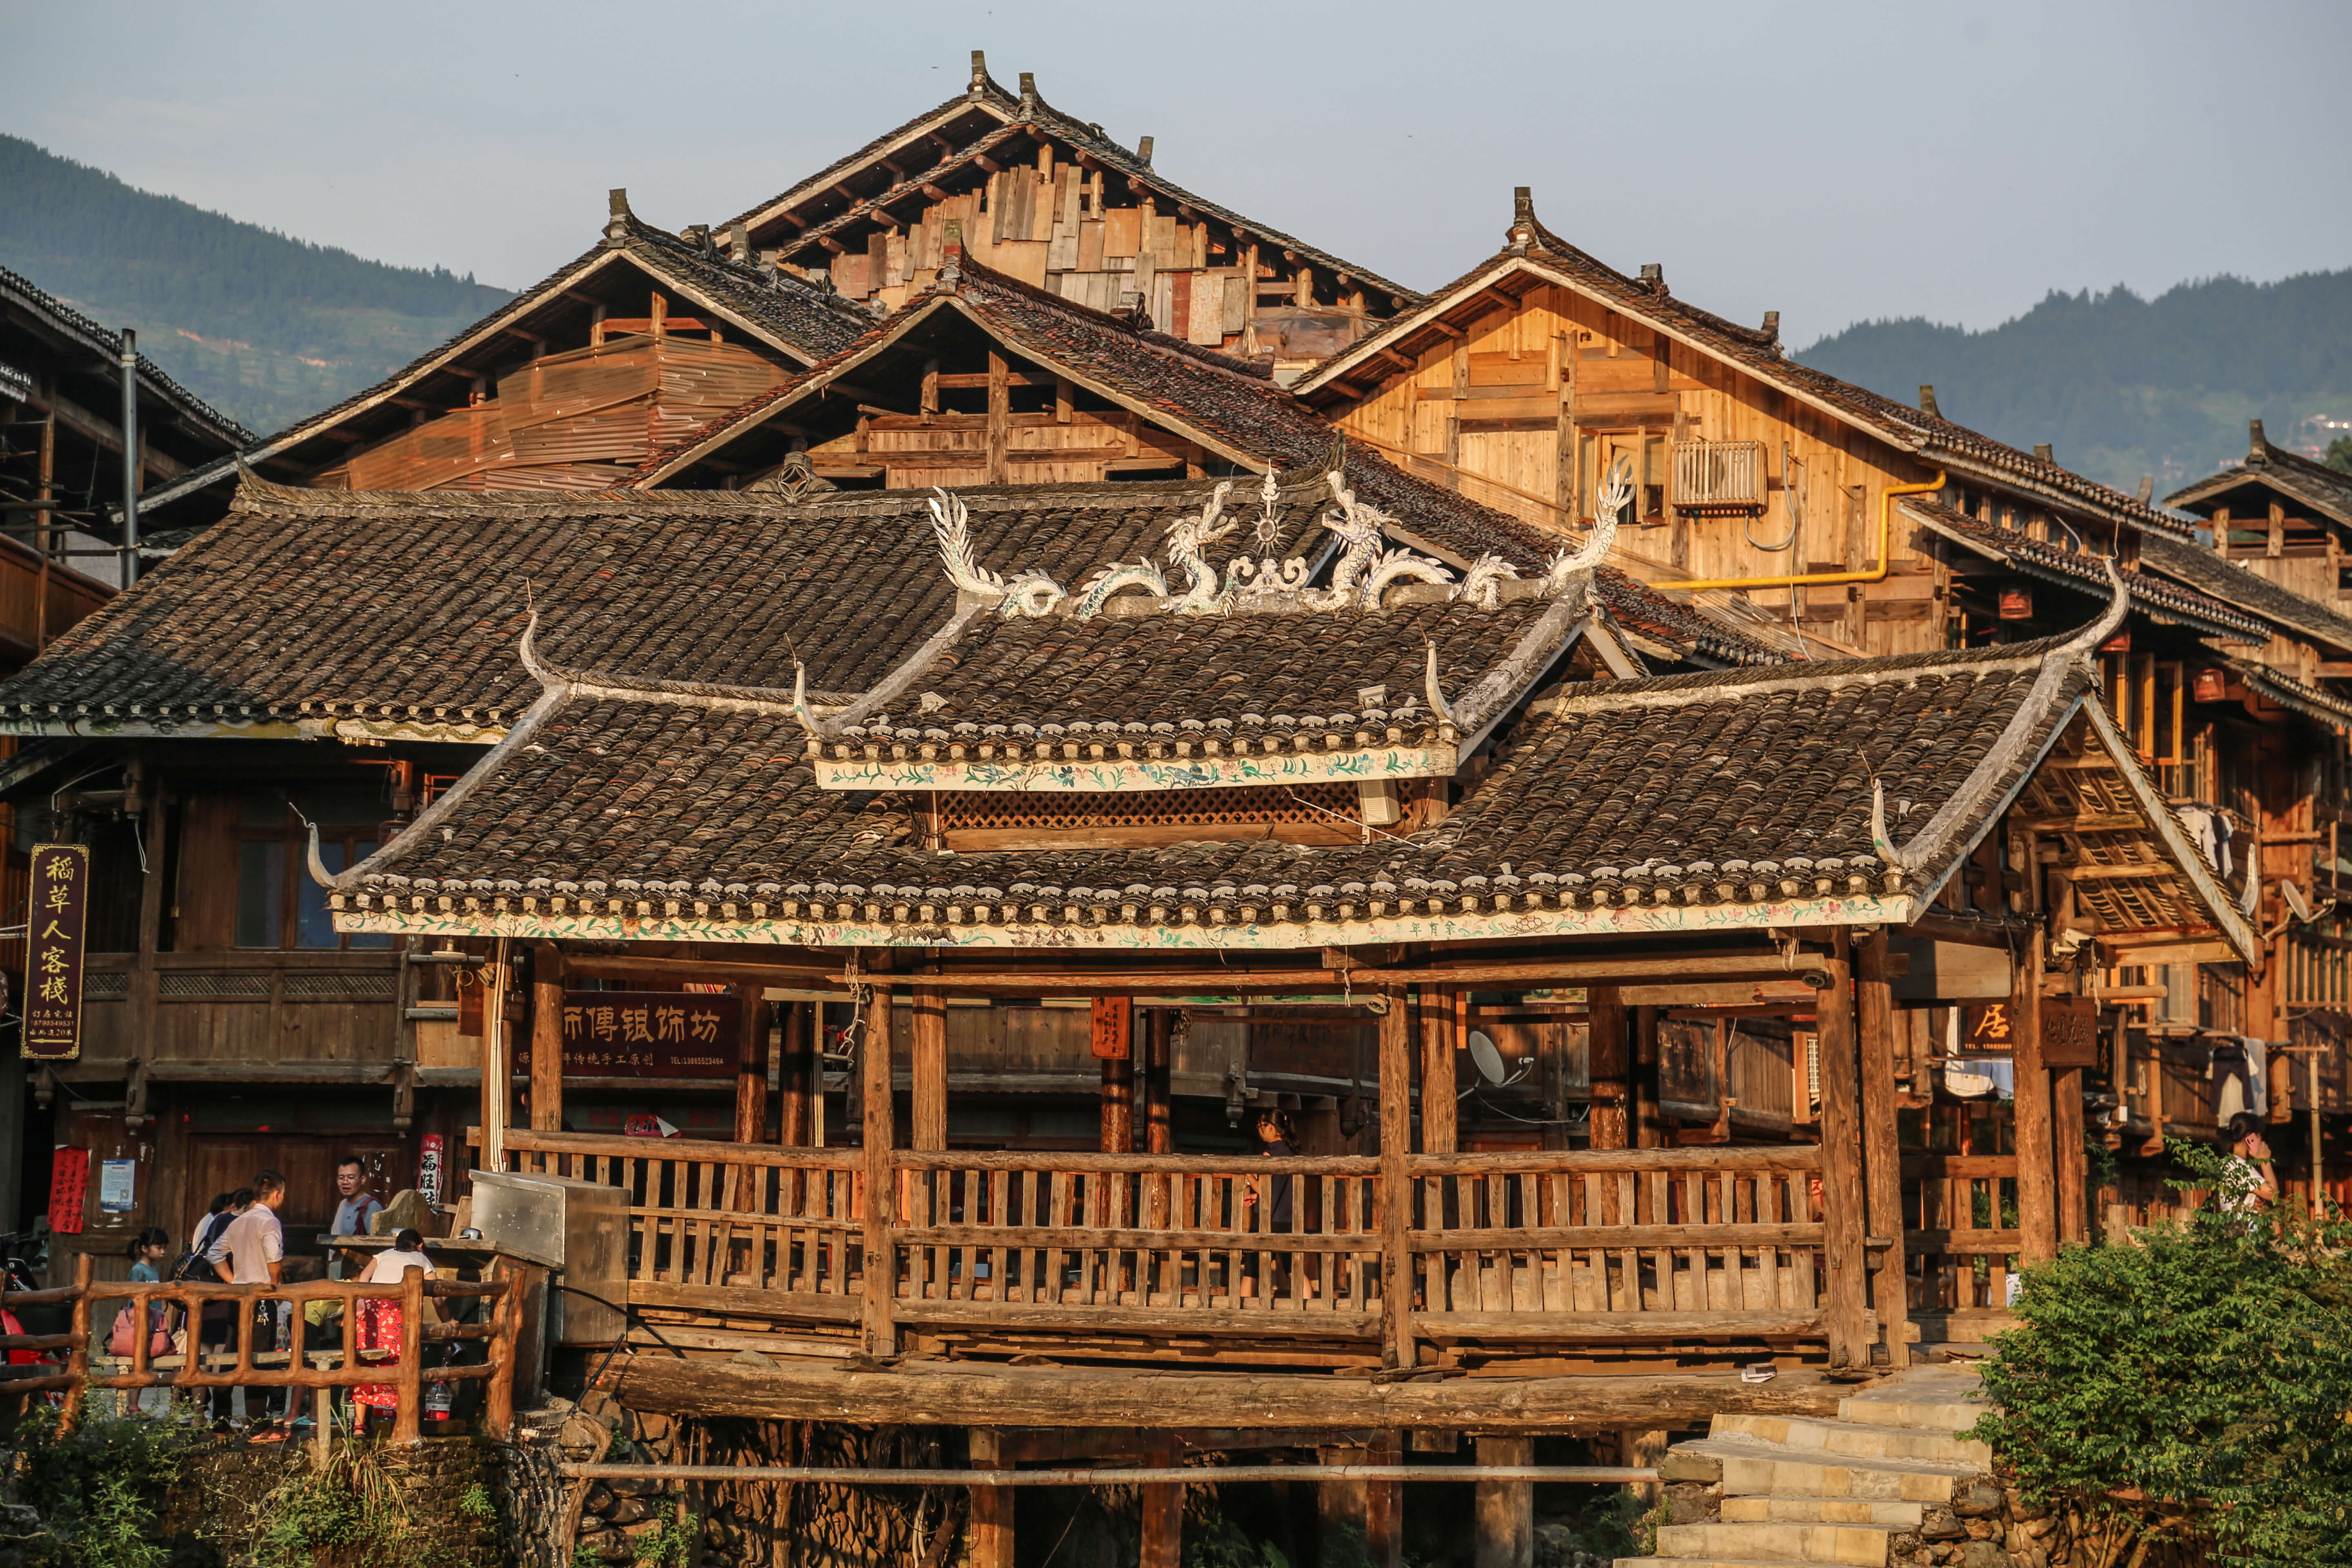 Zhaoxing Dong village_Guizhou_ Architecture on the road